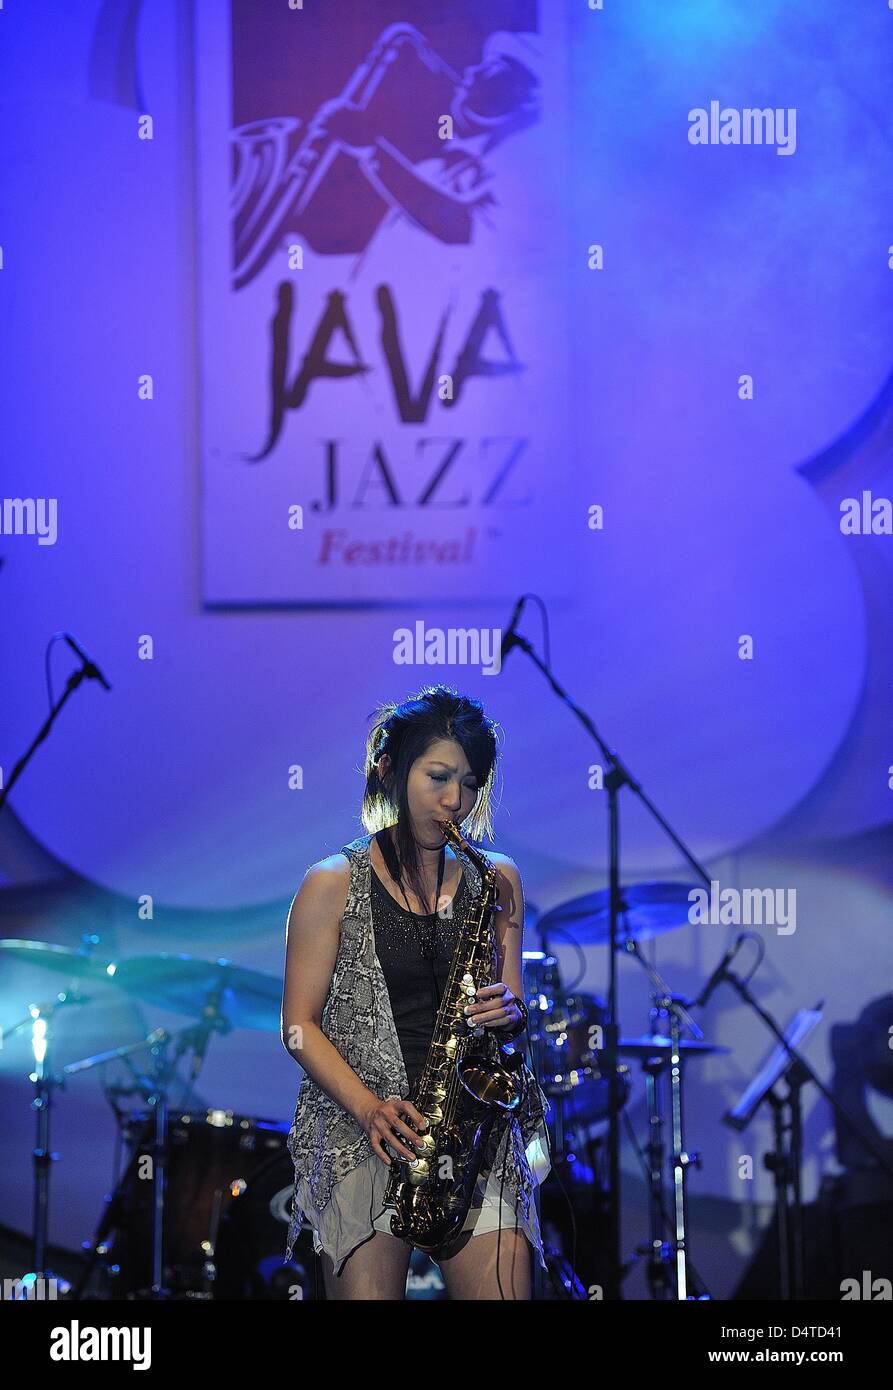 Kaori Kobayashi, Mar 03, 2013 :  Kaori Kobayashi, Japanese jazz saxophonist and flautist performance at Java Jazz Festival 2013. Java Jazz Festival 2013 tagline Jazz Up The World, featuring 50 international jazz musicians and 150 locals would be held in Jakarta International Expo Kemayoran, March 1-3, 2013 with 17 stages and more than 60 shows. (Photo by Robertus Pudyanto/Aflo) Stock Photo